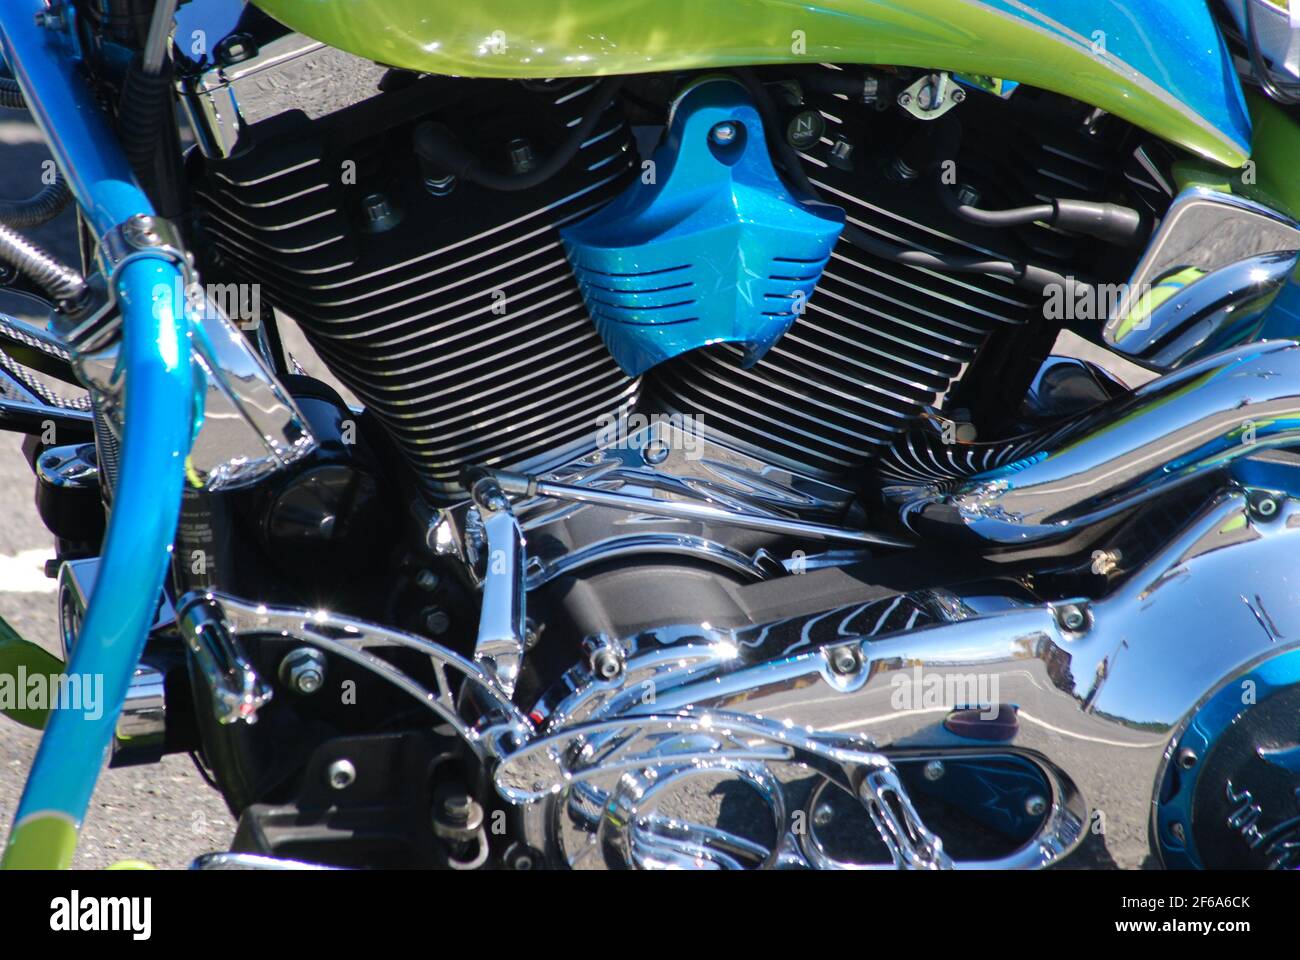 1998 customized motorcycle engine with blue accents. Stock Photo